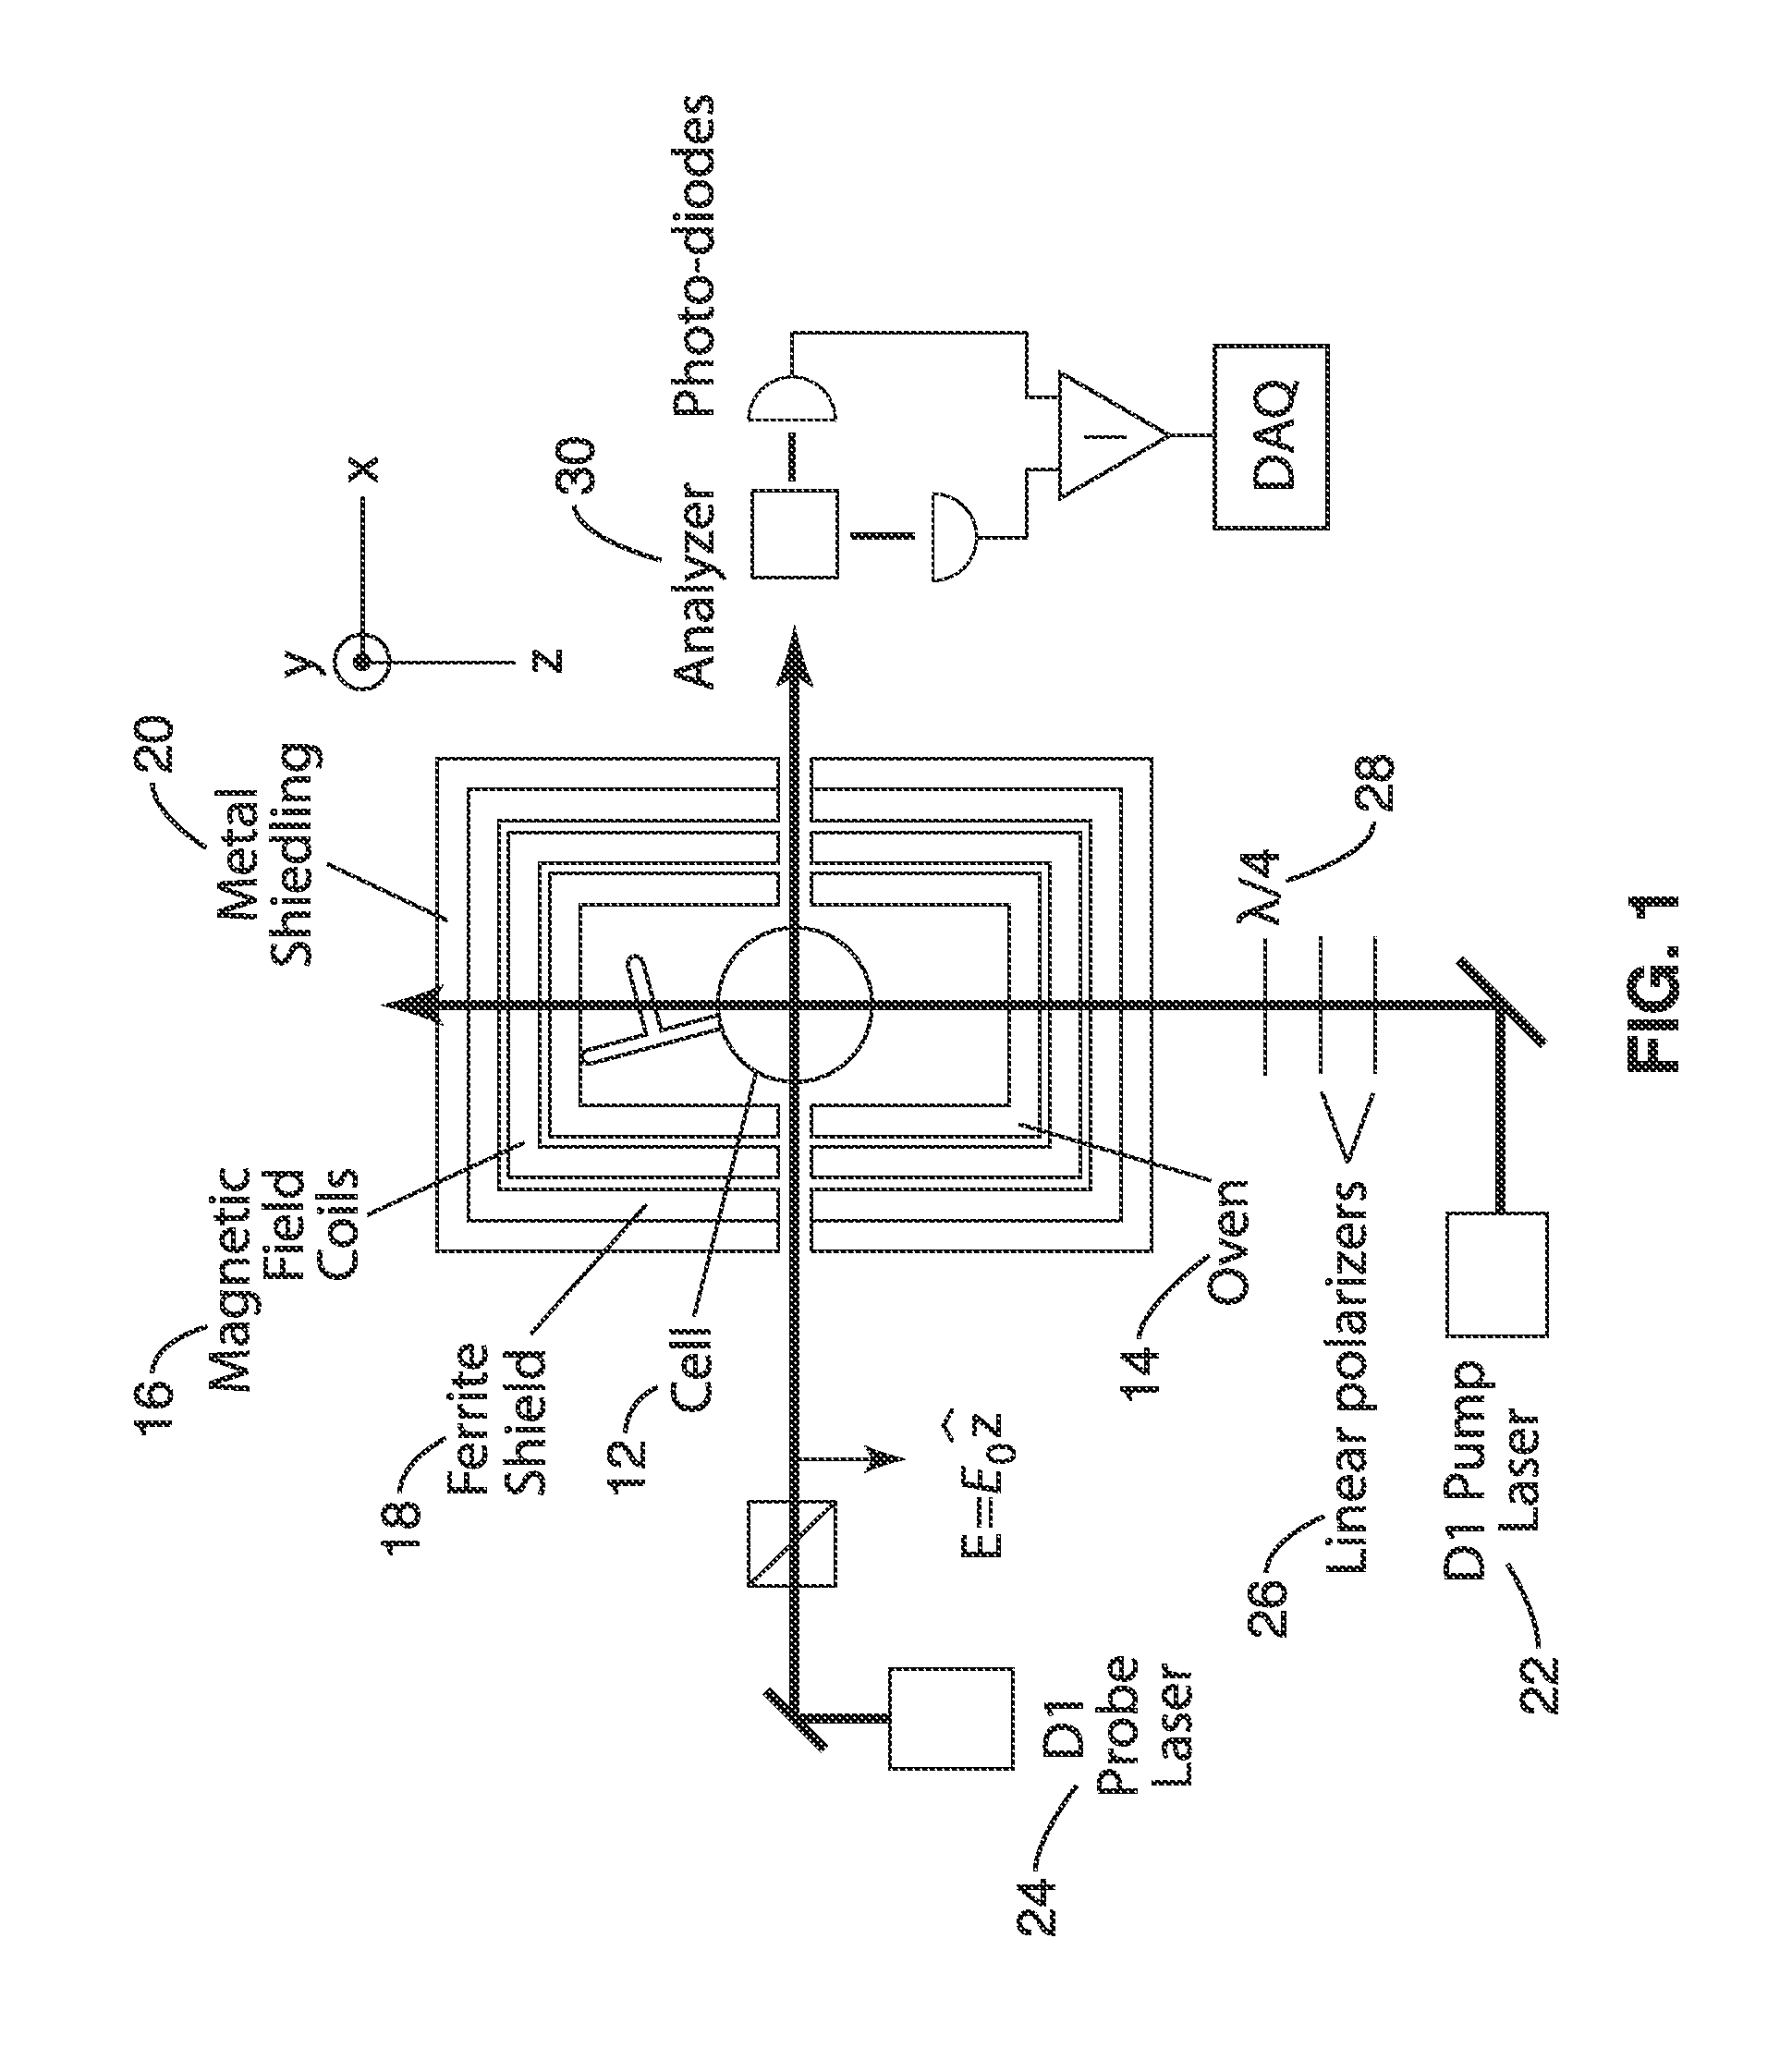 Apparatus and method for increasing spin relaxation times for alkali atoms in alkali vapor cells